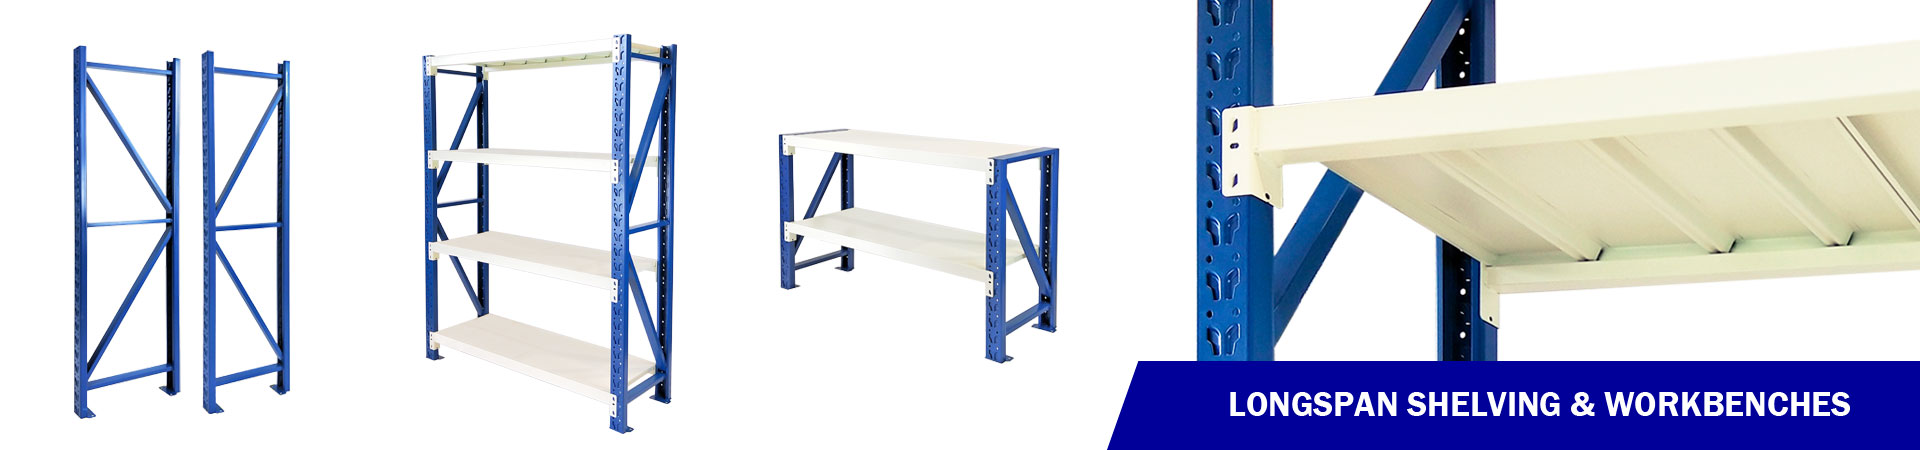 Long span shelving solutions for your garage or workplace!